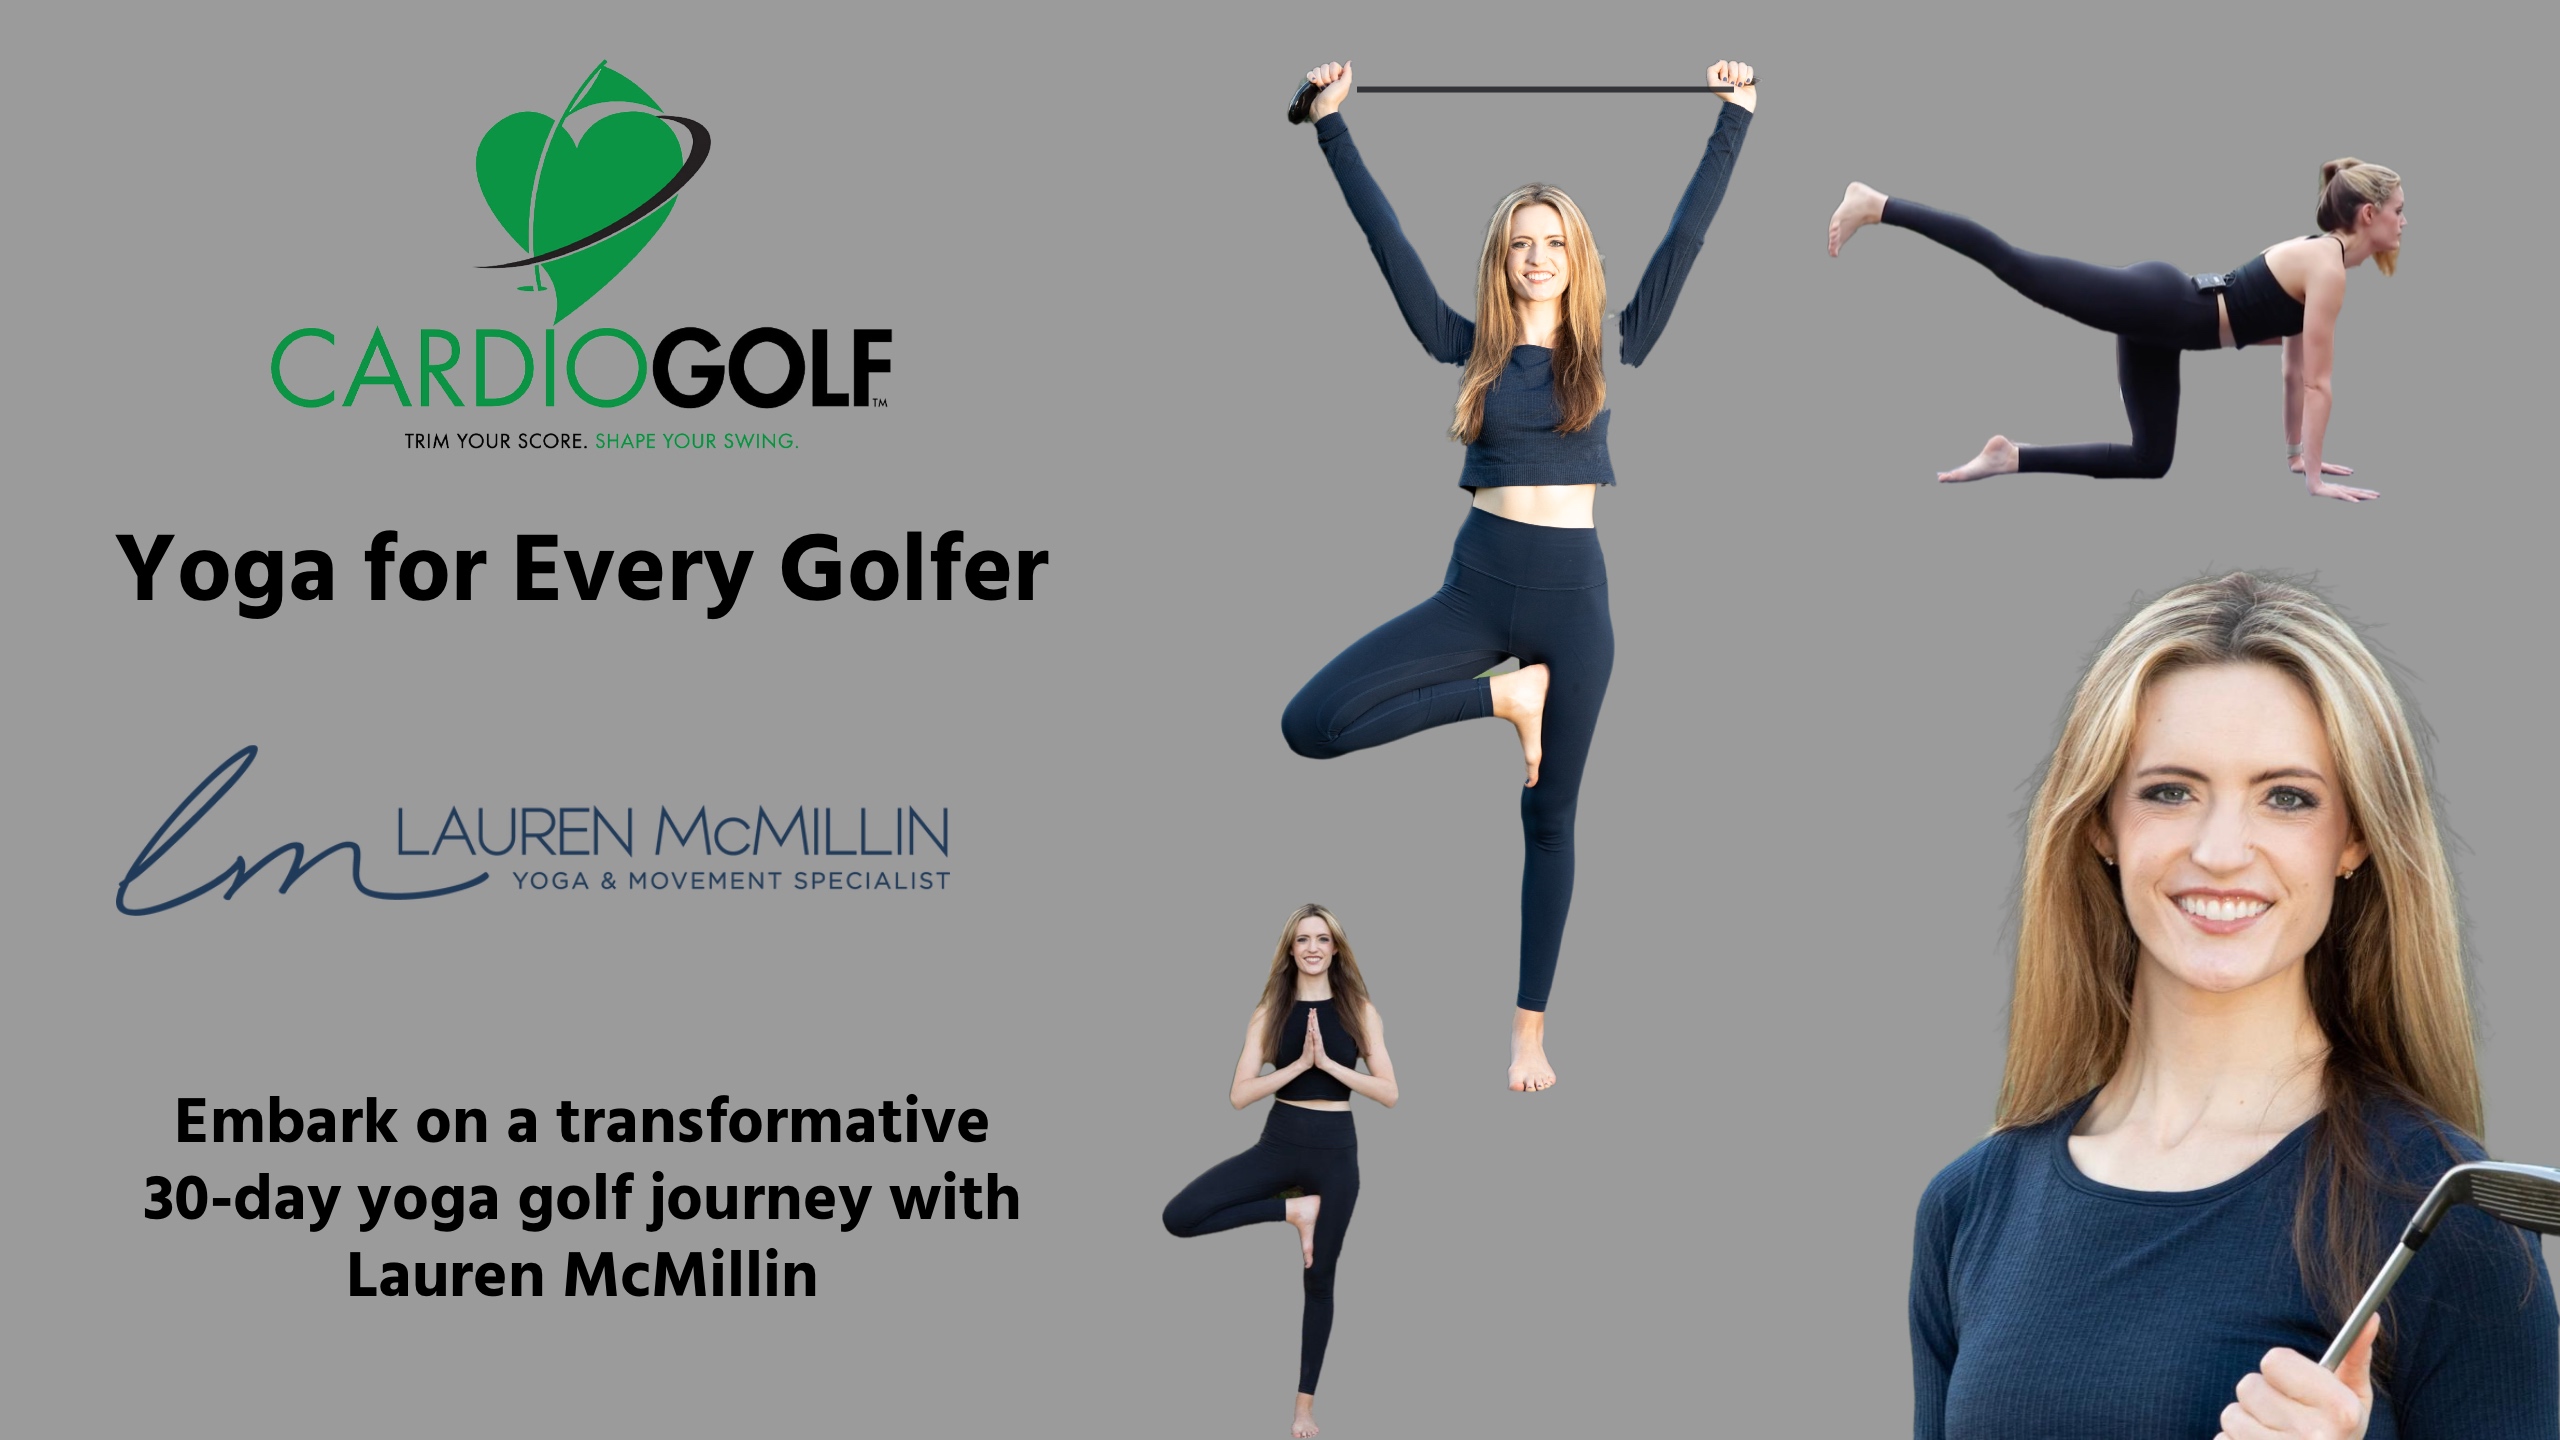 YOGA FOR EVERY GOLFER 30-DAY CHALLENGE WITH LAUREN MCMILLIN FREE FOR CARDIOGOLF® SUBSCRIBERS. CardioGolf.com